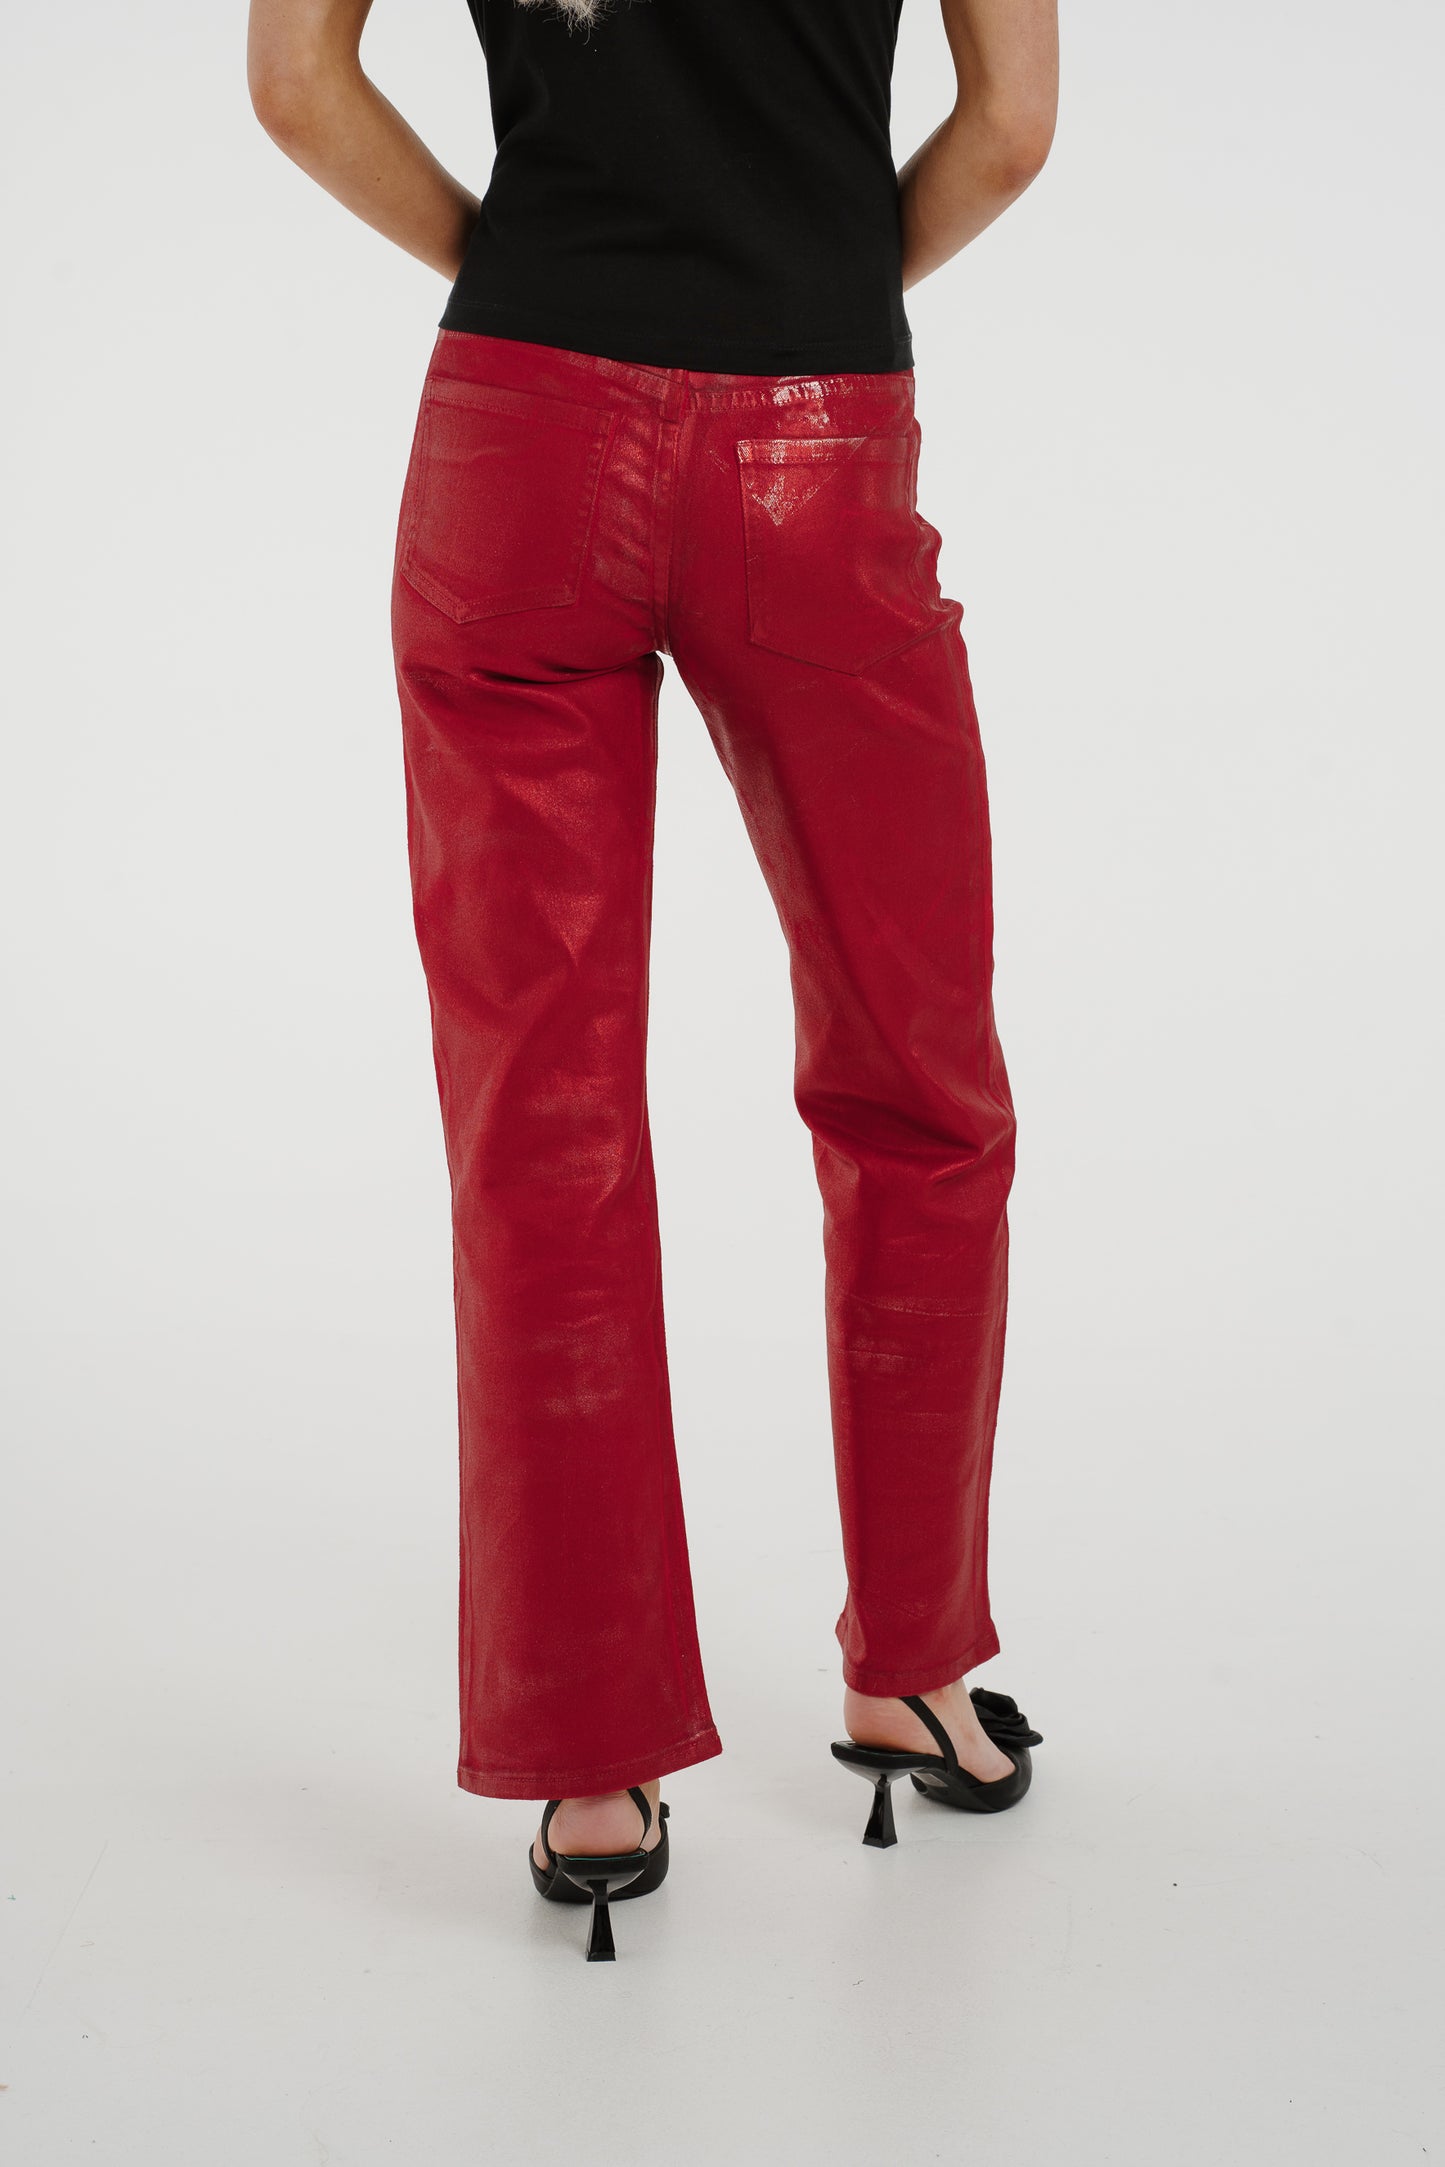 Quinn Metallic Jeans In Red